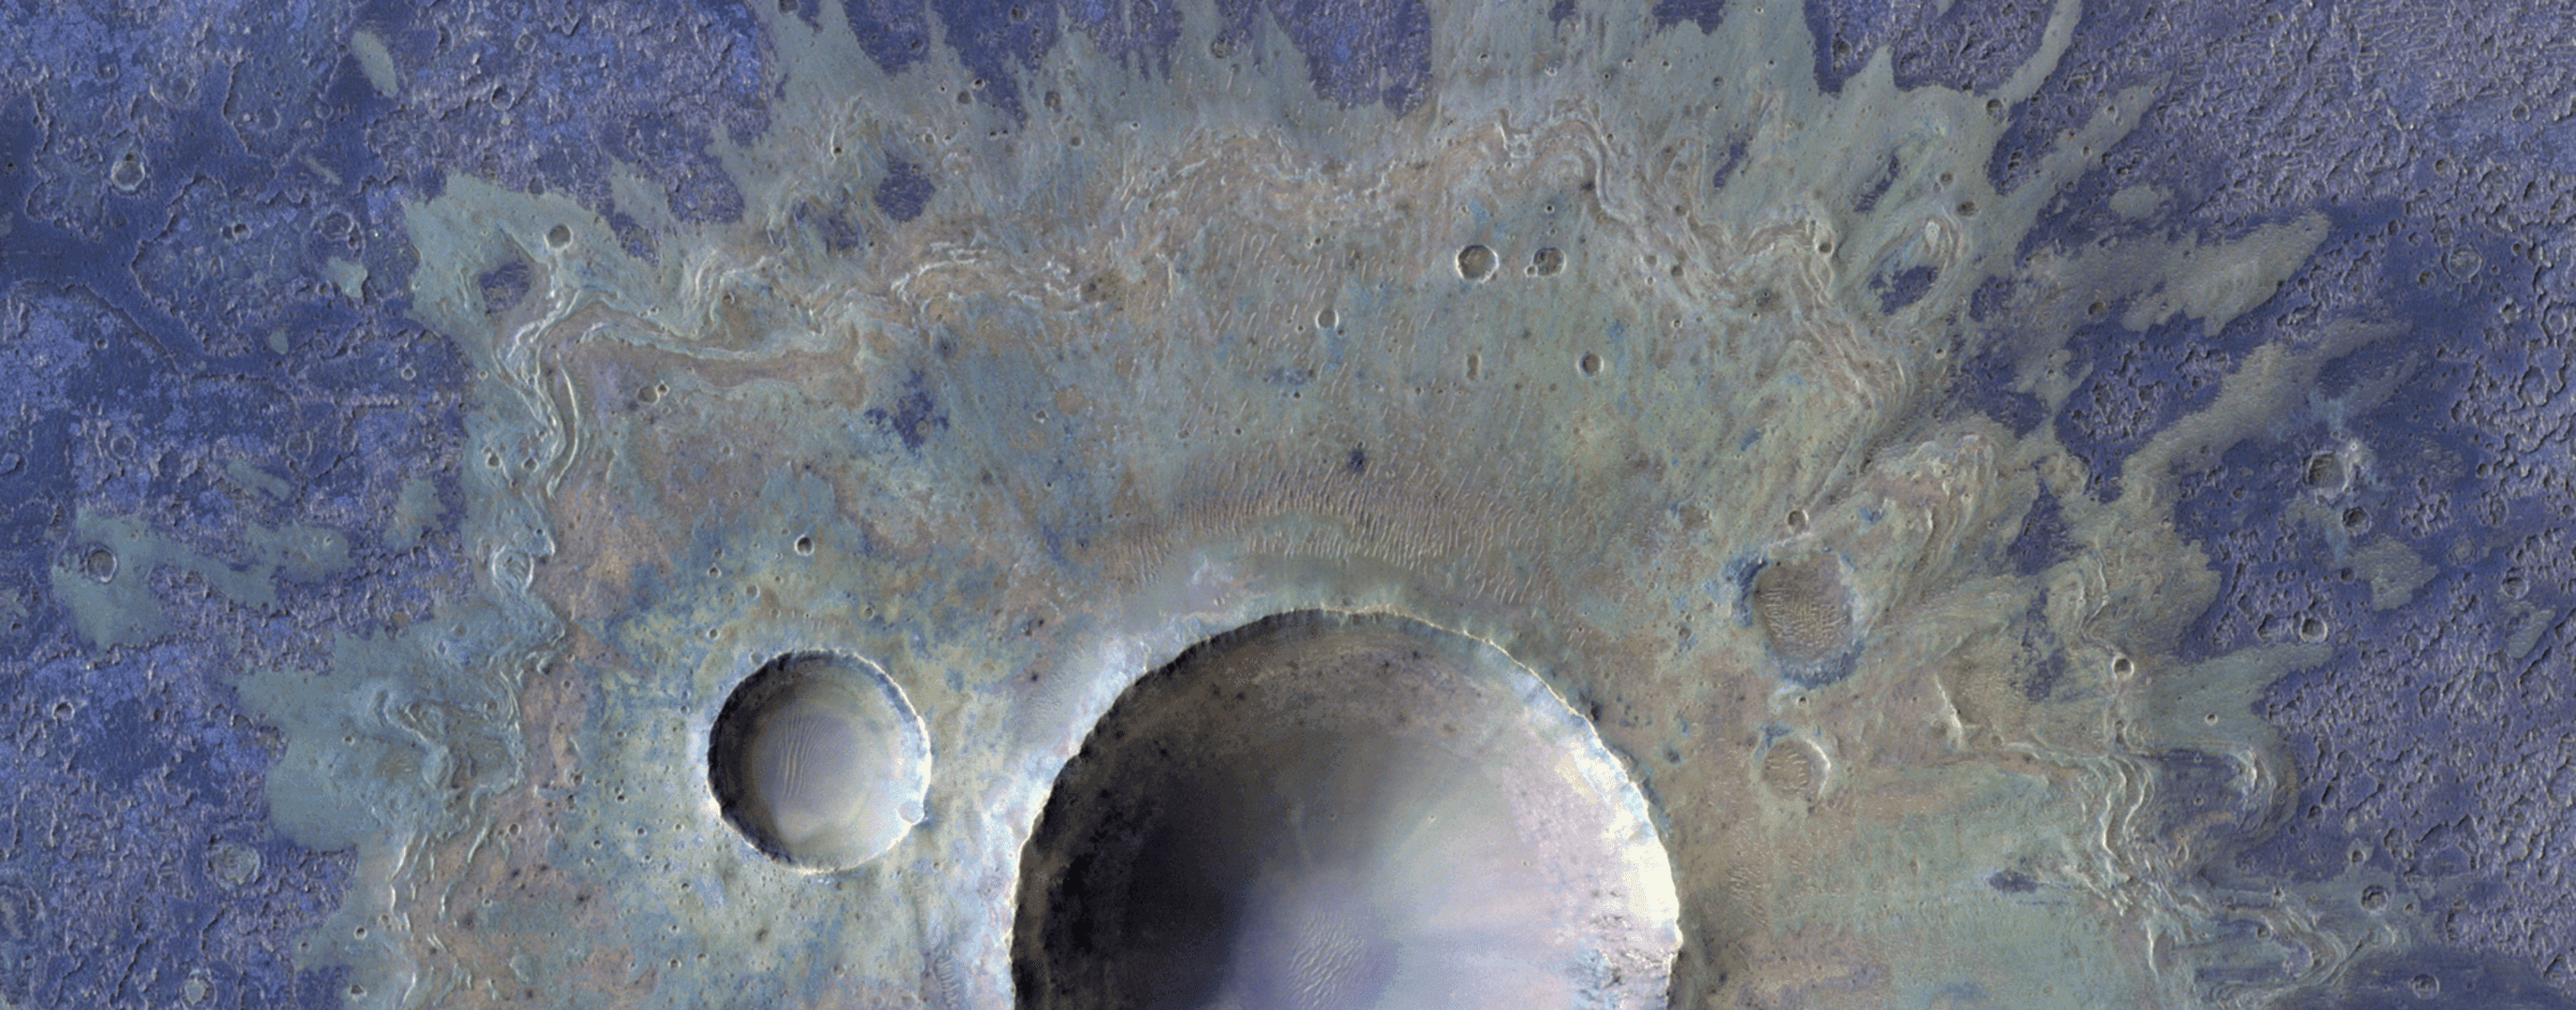 An interesting bunch of craters in Ganges Chasma, Mars.